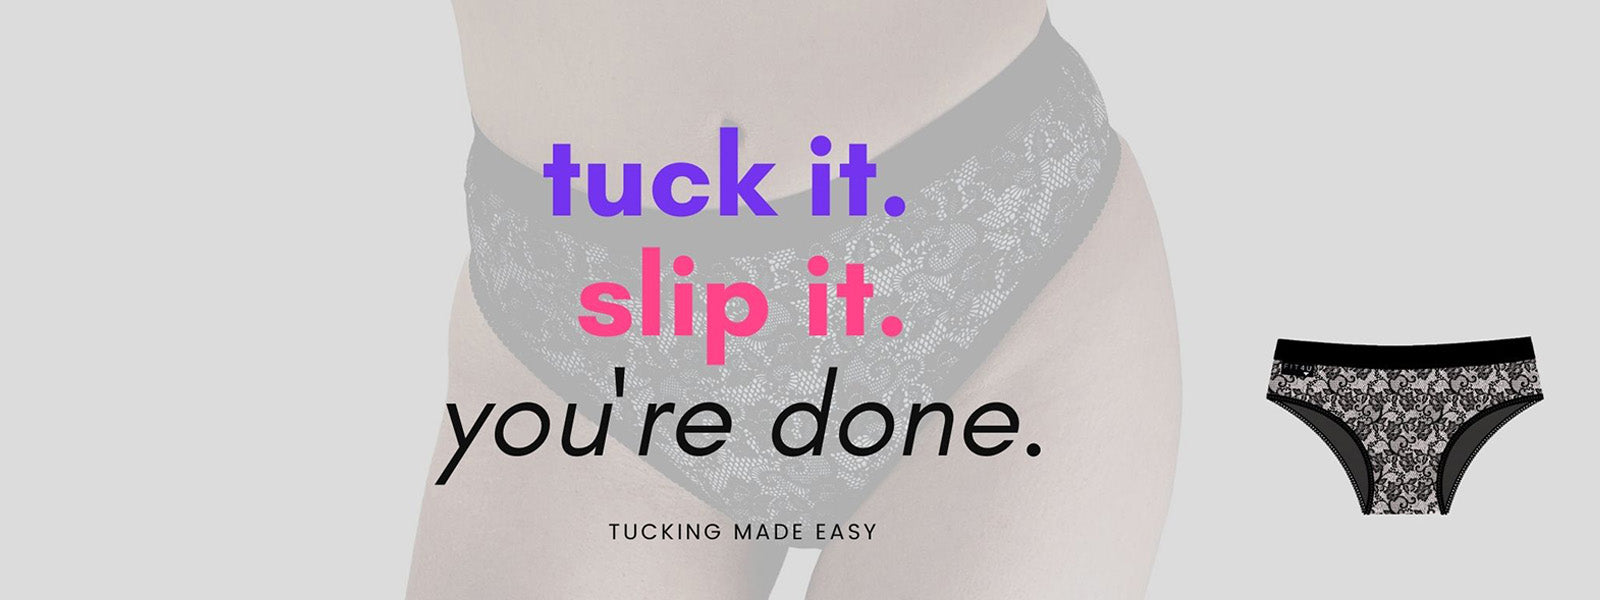 Tucking, made easy. Tuck it photo picture